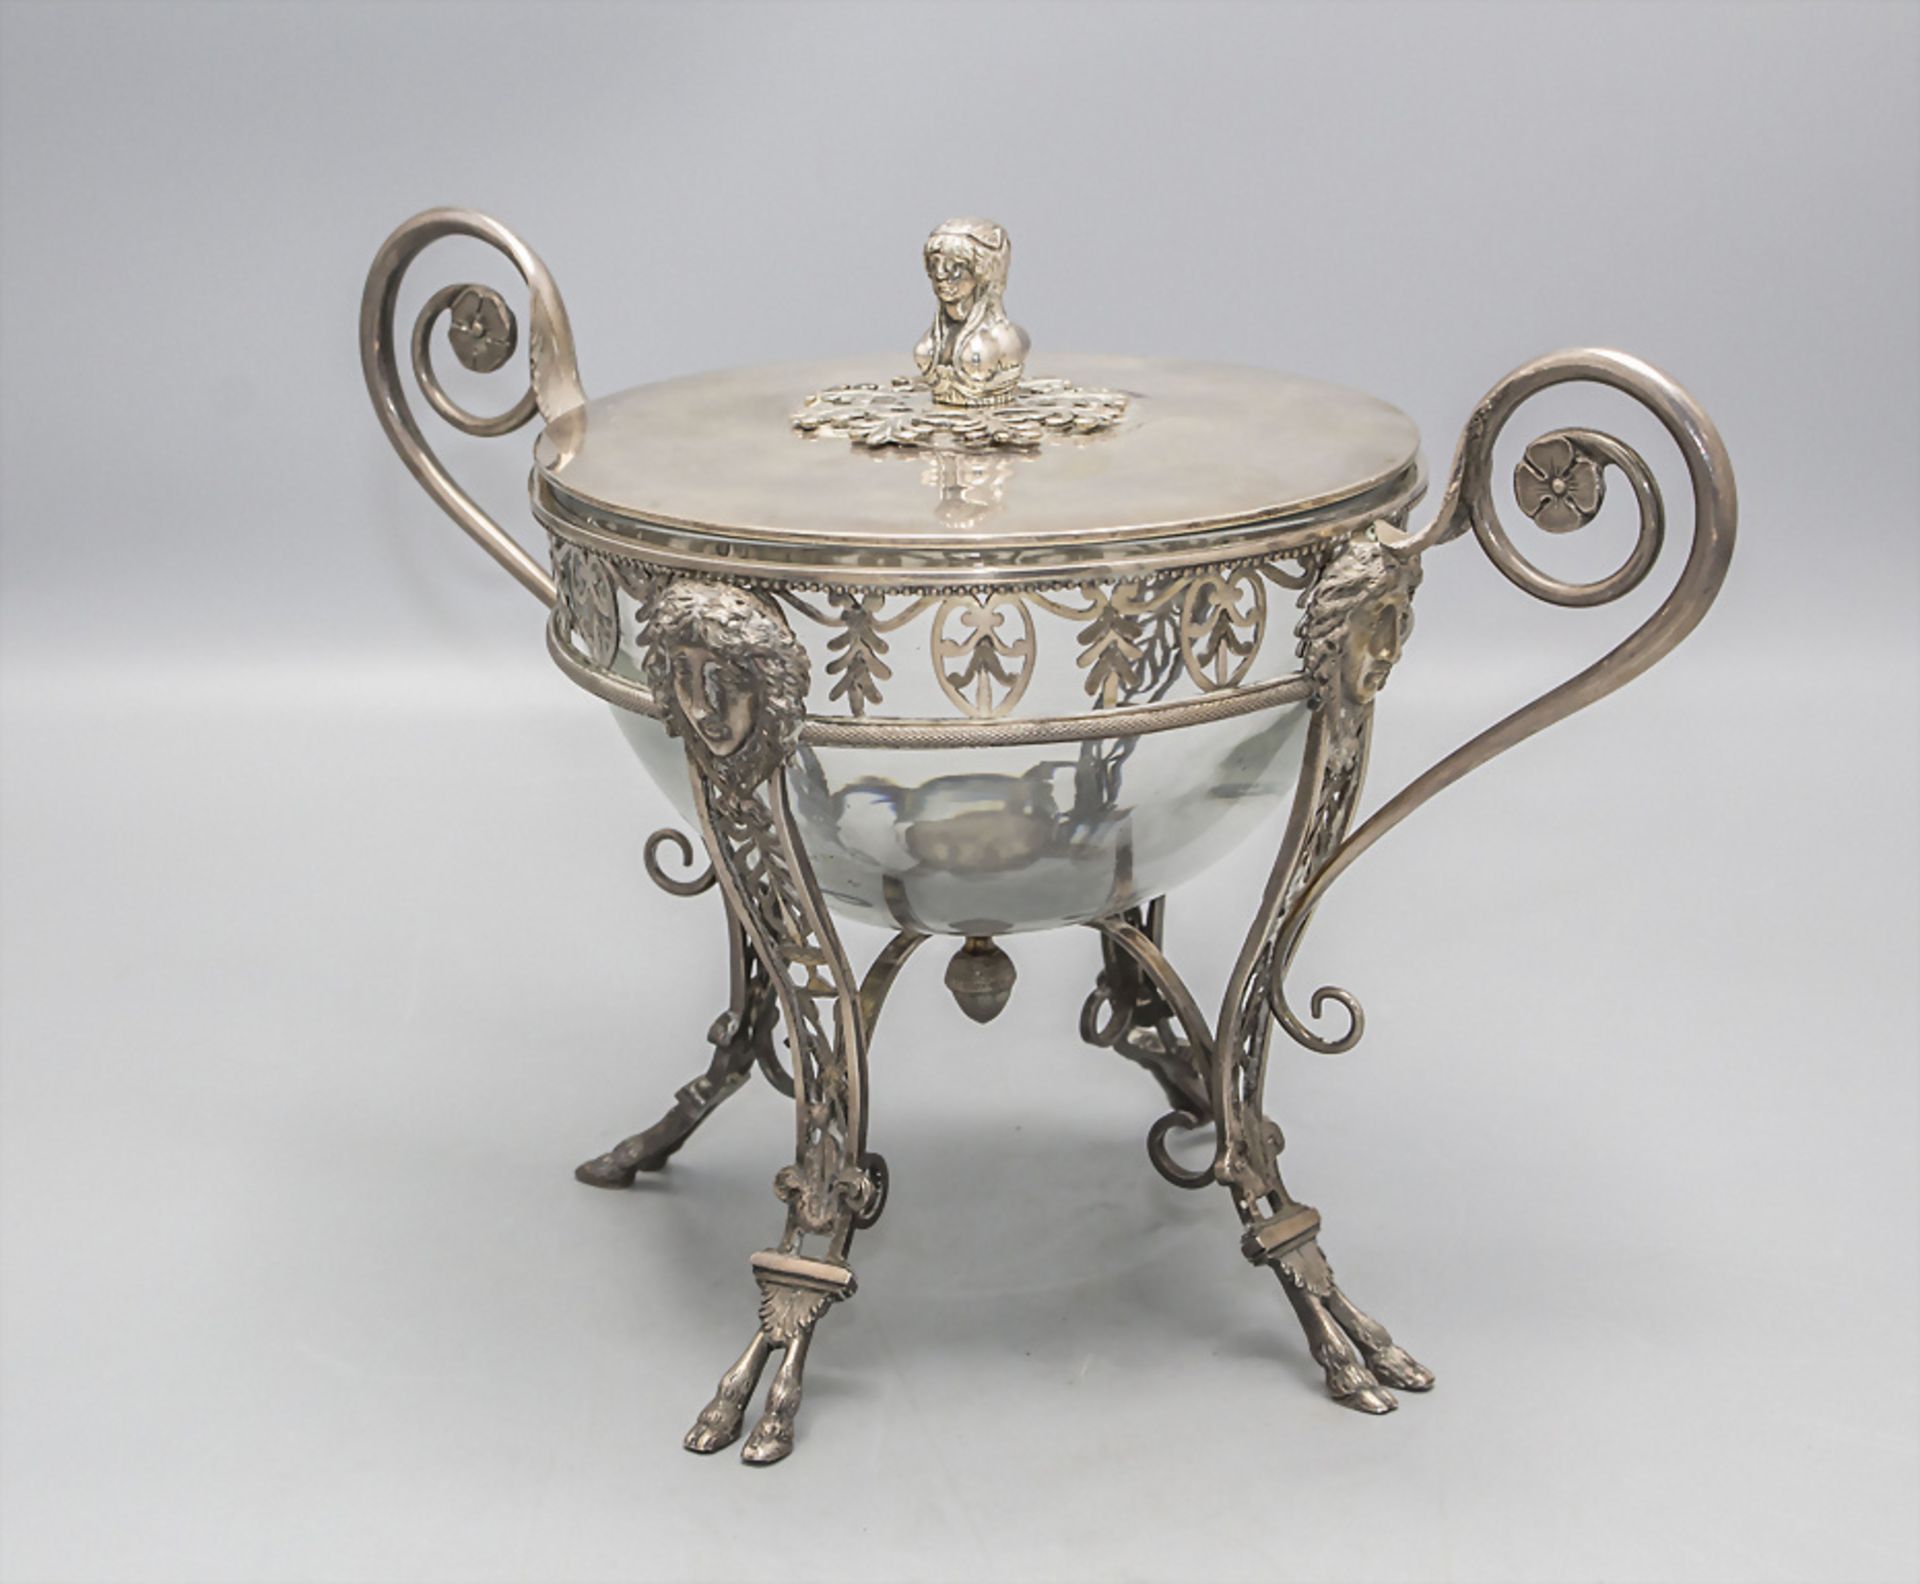 Empire Bonbonniere / An Empire silver candy bowl with lid, Paris, 1798-1809 - Image 3 of 6